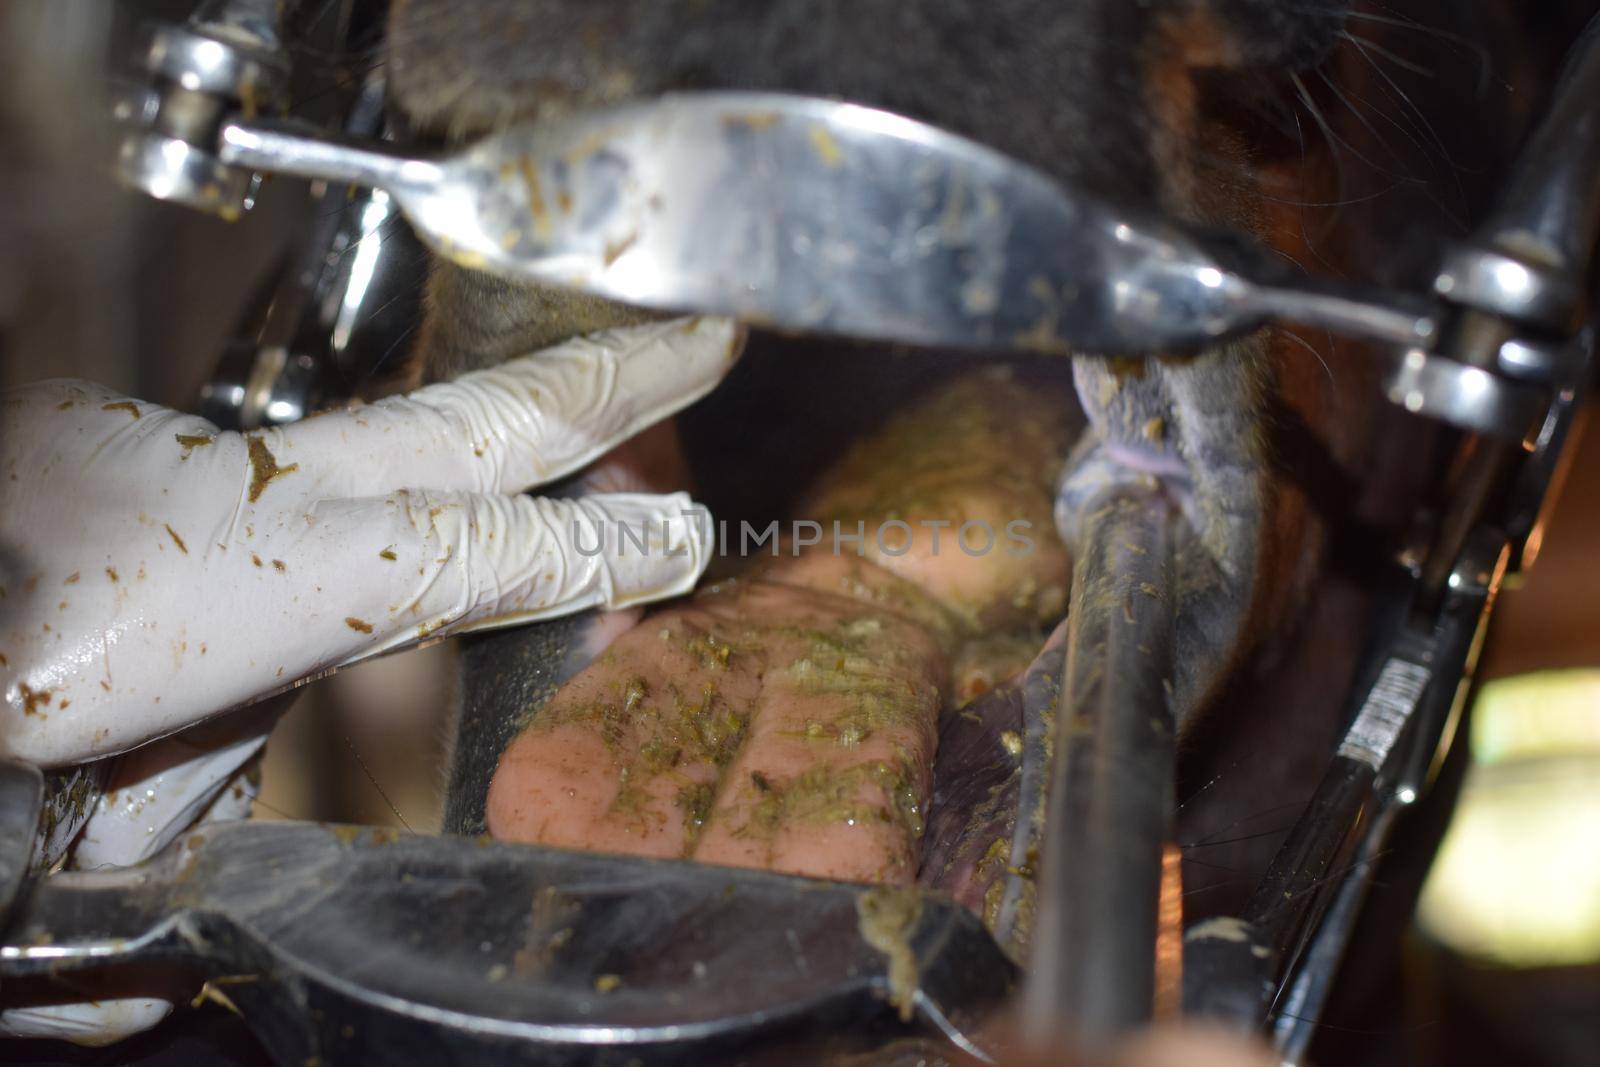 Close up of a horse dental treatment with grinder and mouth gate by Luise123